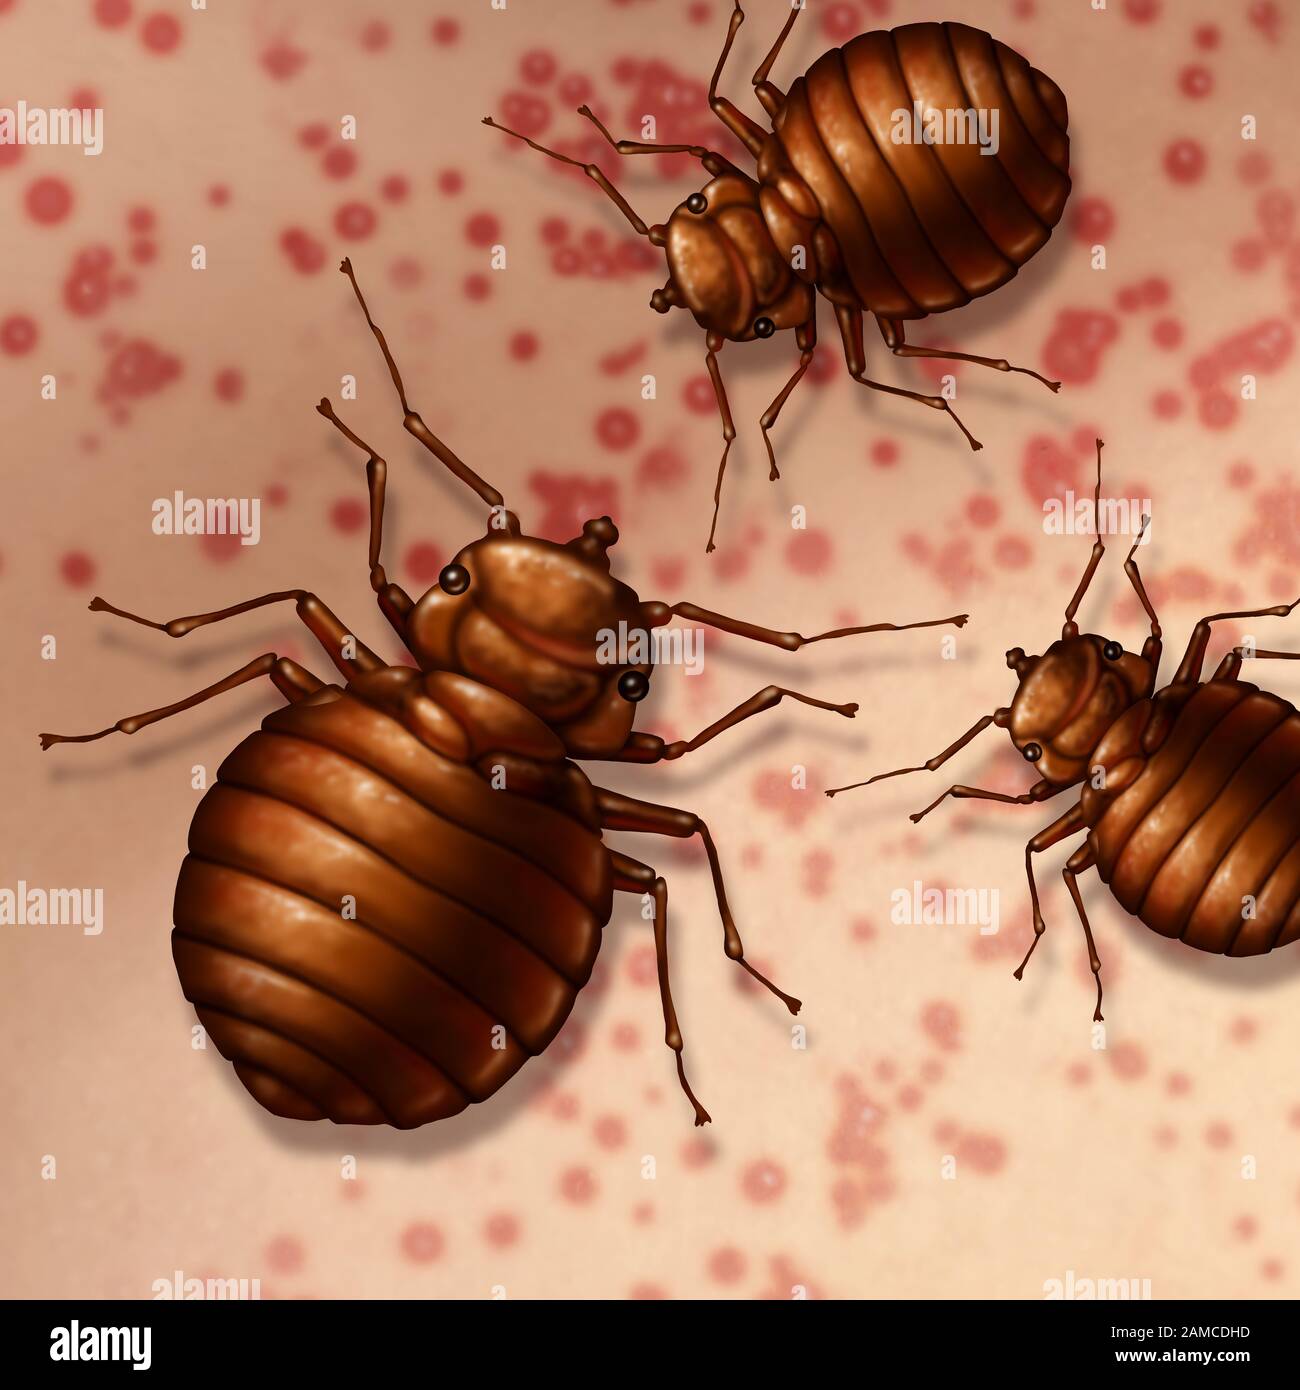 Bed bug on skin as bedbugs bites on the human body or bedbug infestation concept as a close up of  parasitic insect pests as a hygiene symbol. Stock Photo